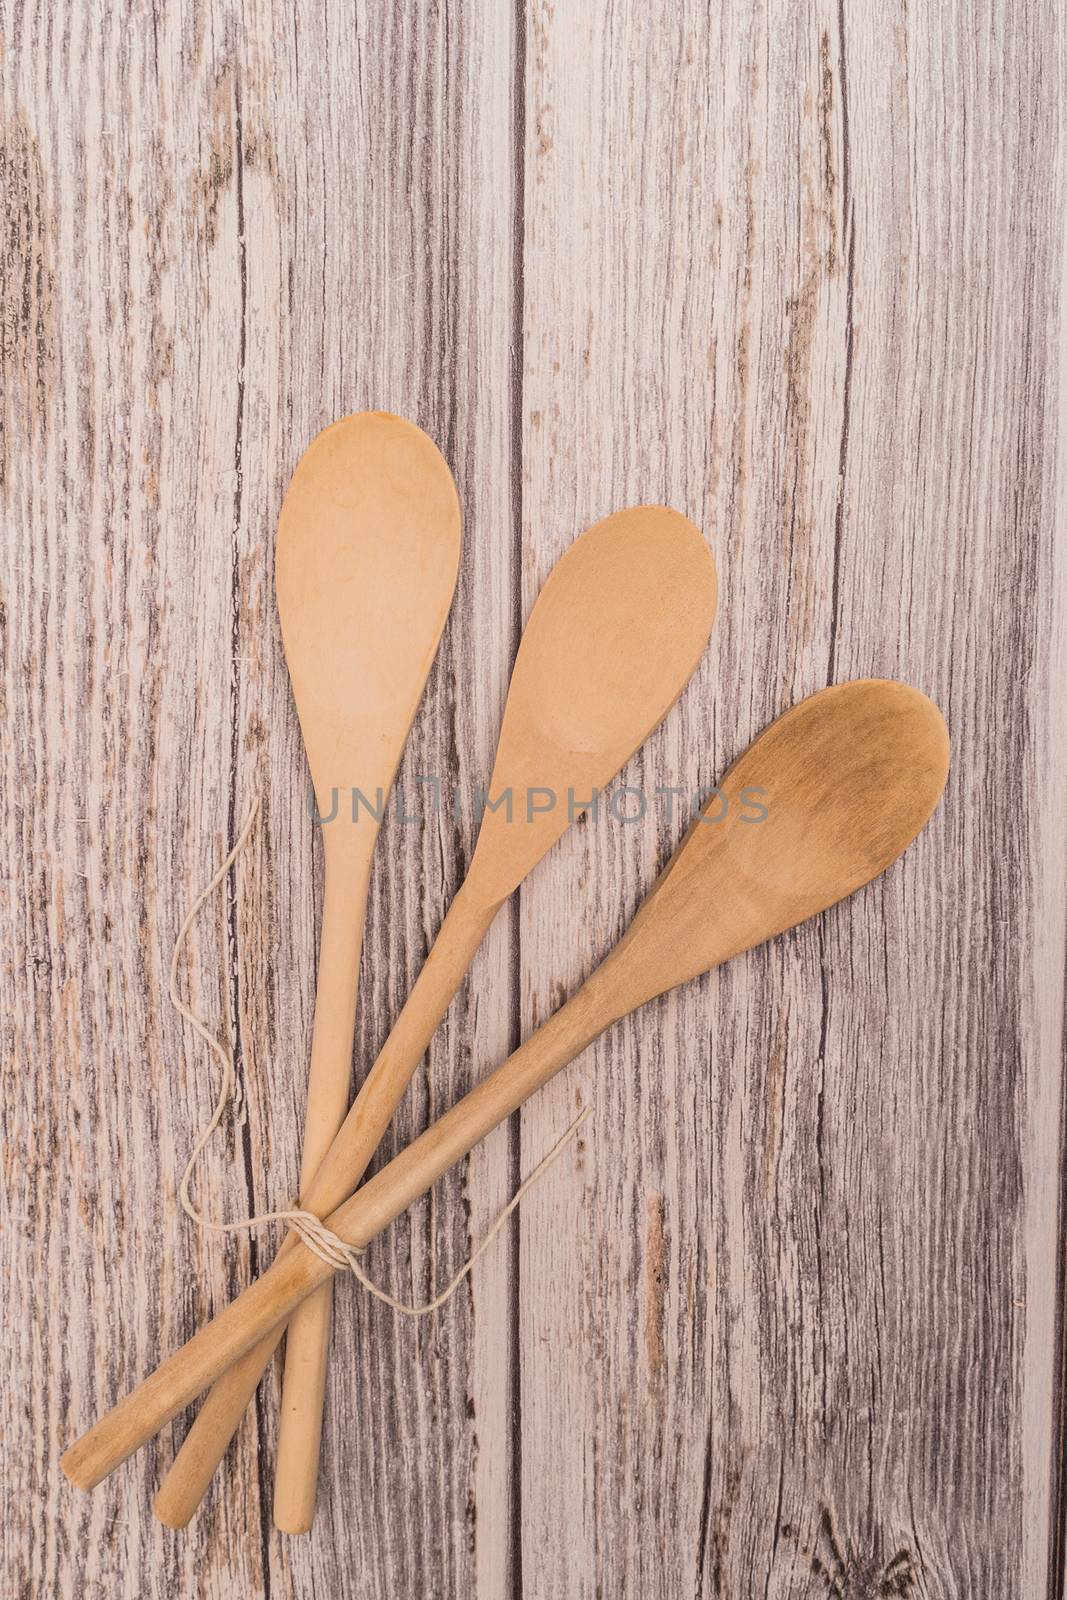 Wooden spoon tied up with a ribbon on rustic background. Top view with copy space.